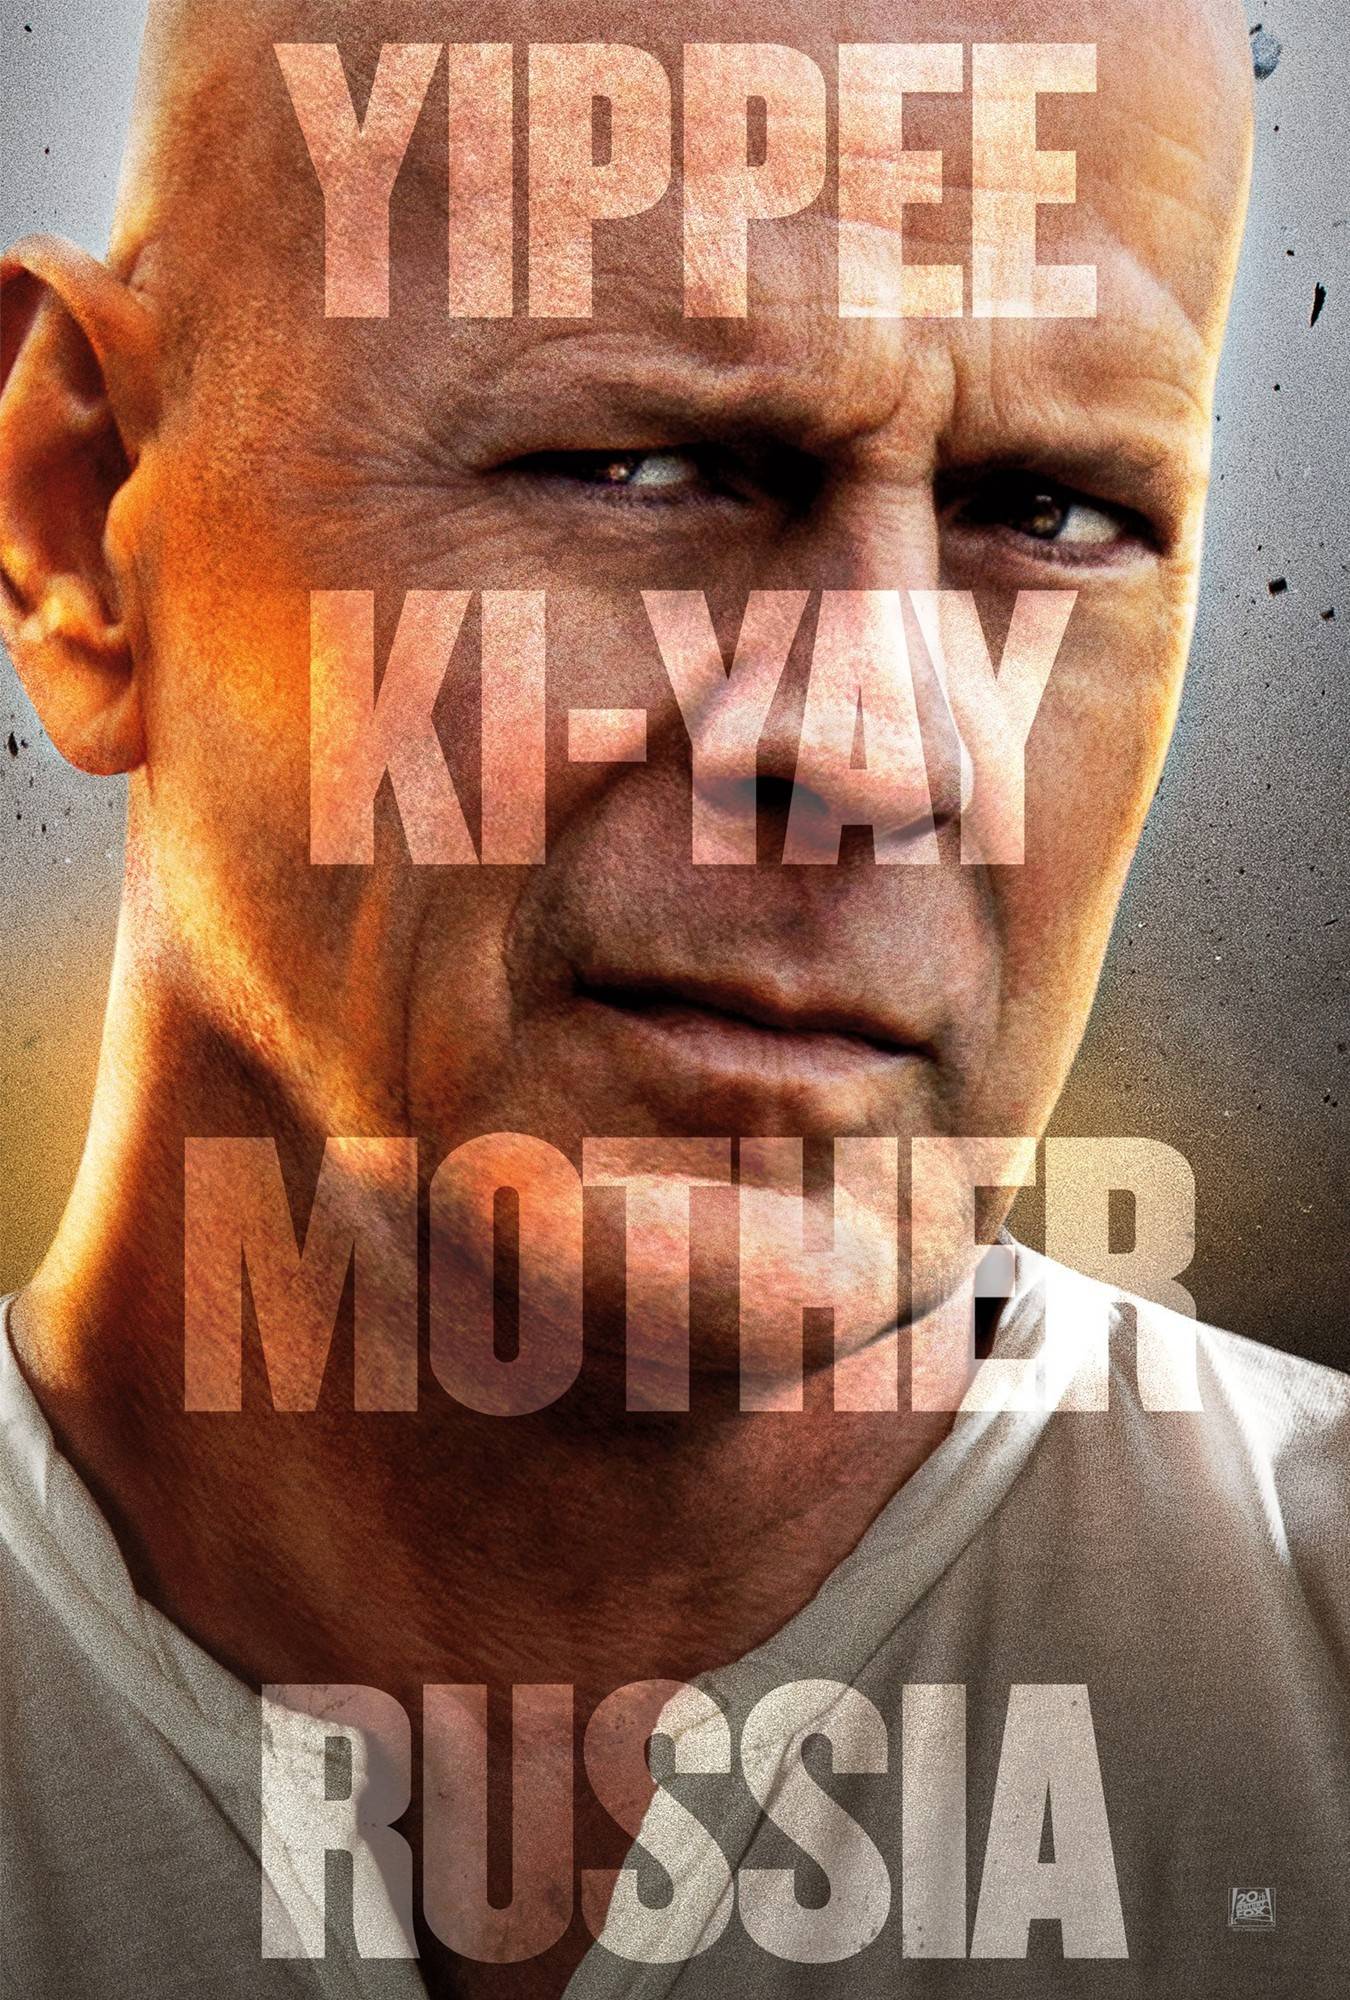 A Good Day To Die Hard 2013 Dvdrip Xvid Sparks